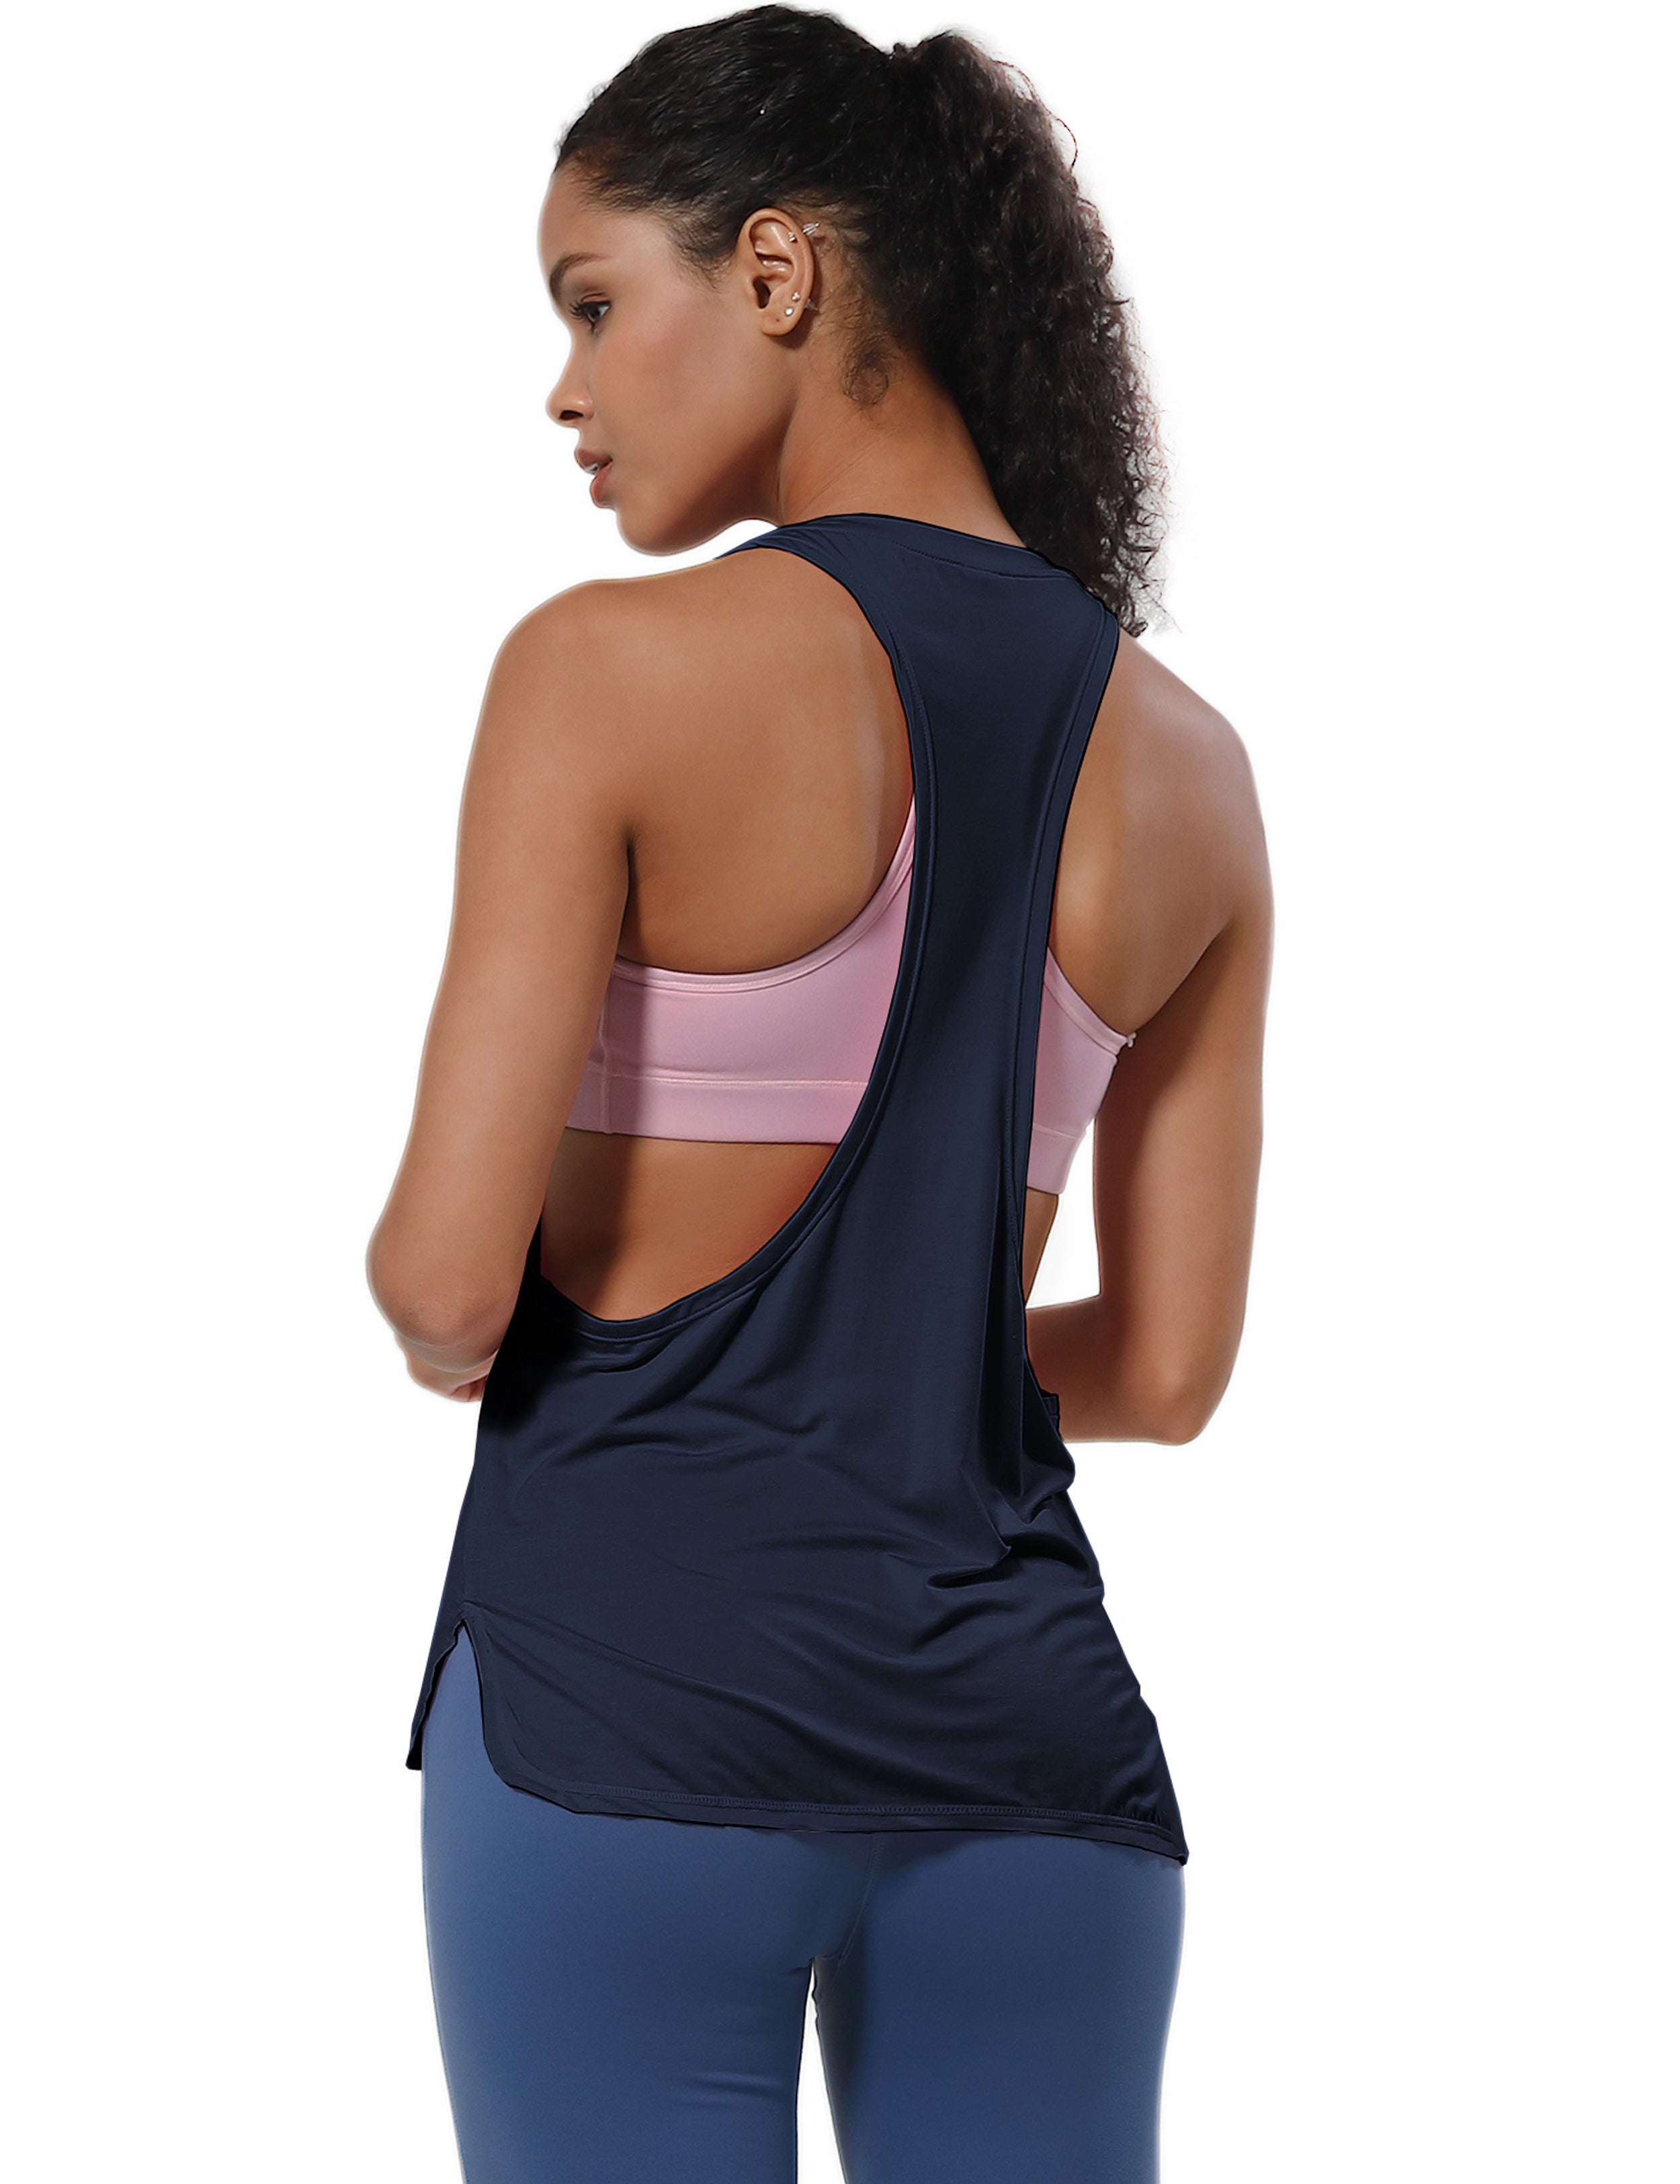 Low Cut Loose Fit Tank Top darknavy Designed for On the Move Loose fit 93%Modal/7%Spandex Four-way stretch Naturally breathable Super-Soft, Modal Fabric